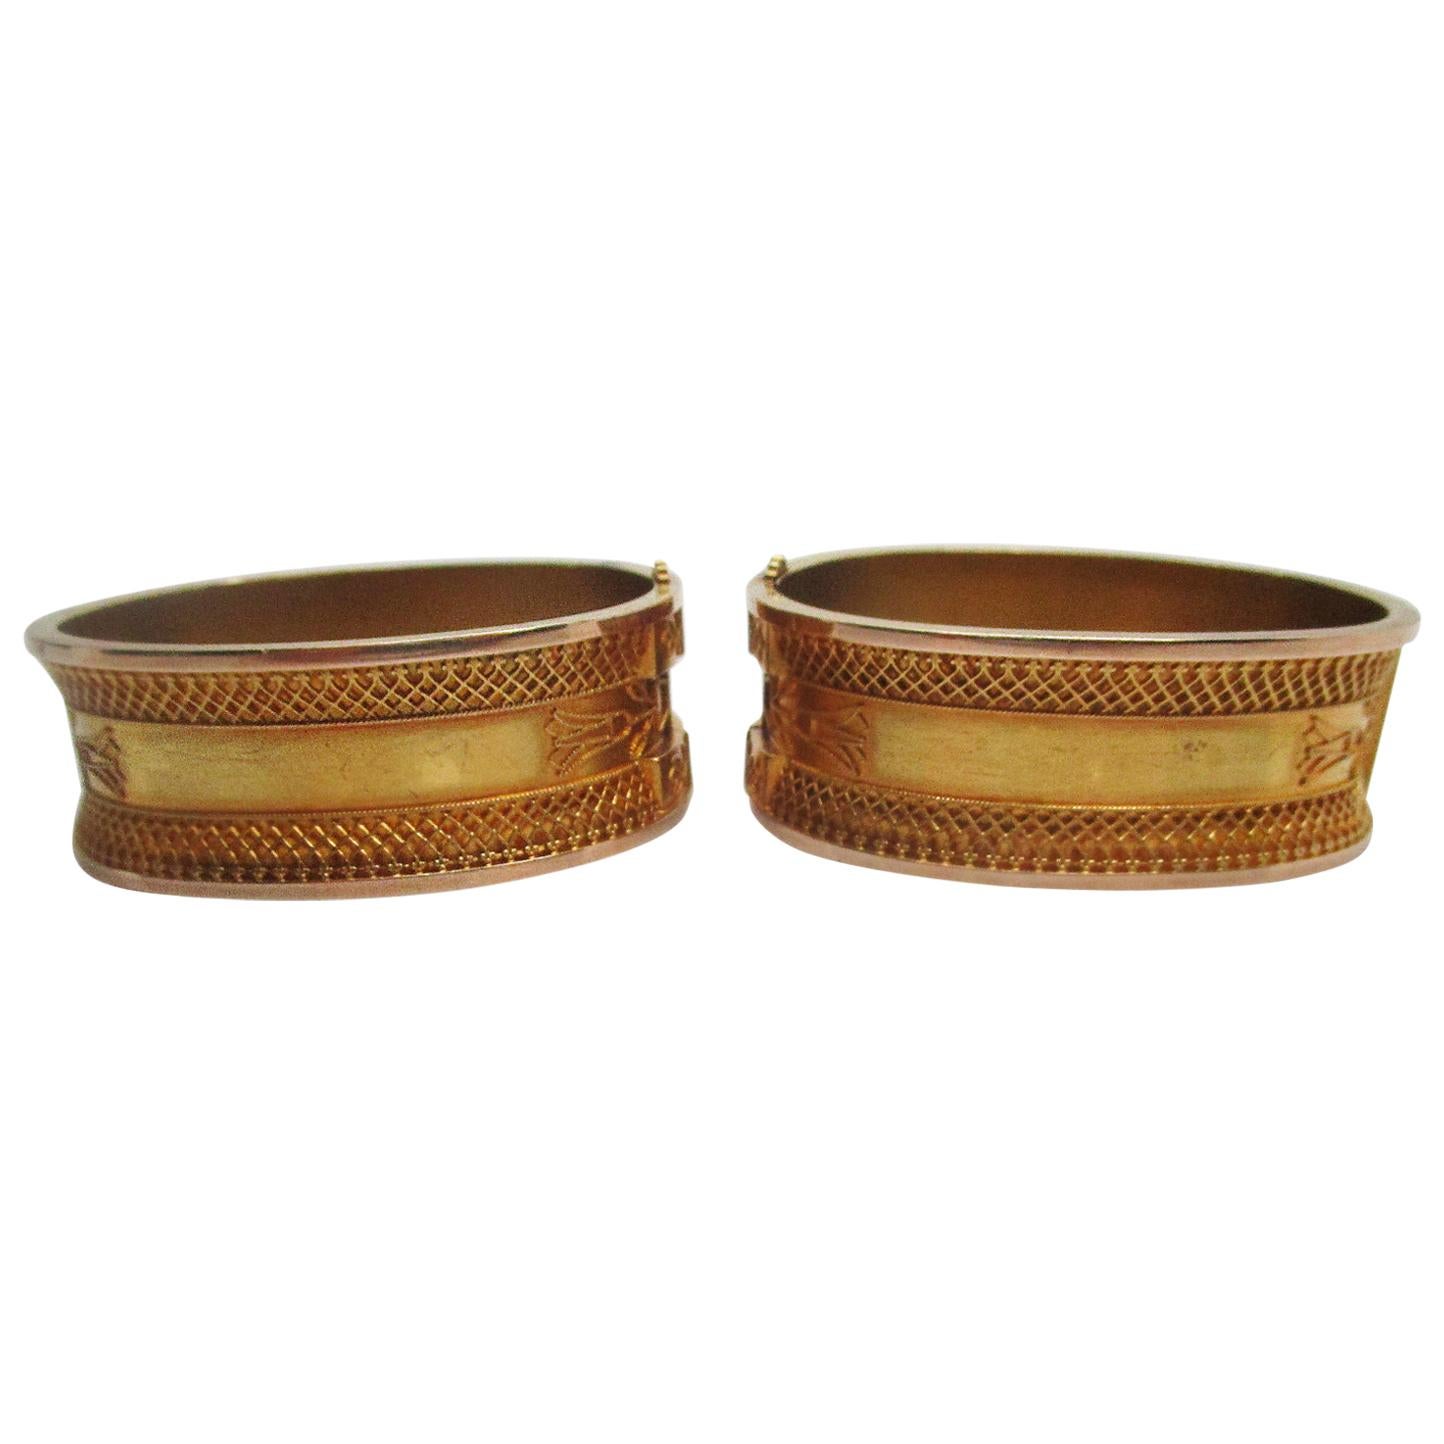 This is an incredible set of two matching 14k yellow gold Etruscan hinged bangles with gorgeous milgrain and filigree details! The bangles are in near mint condition and in their original box!! These bangles are wide and bold. The dramatic design